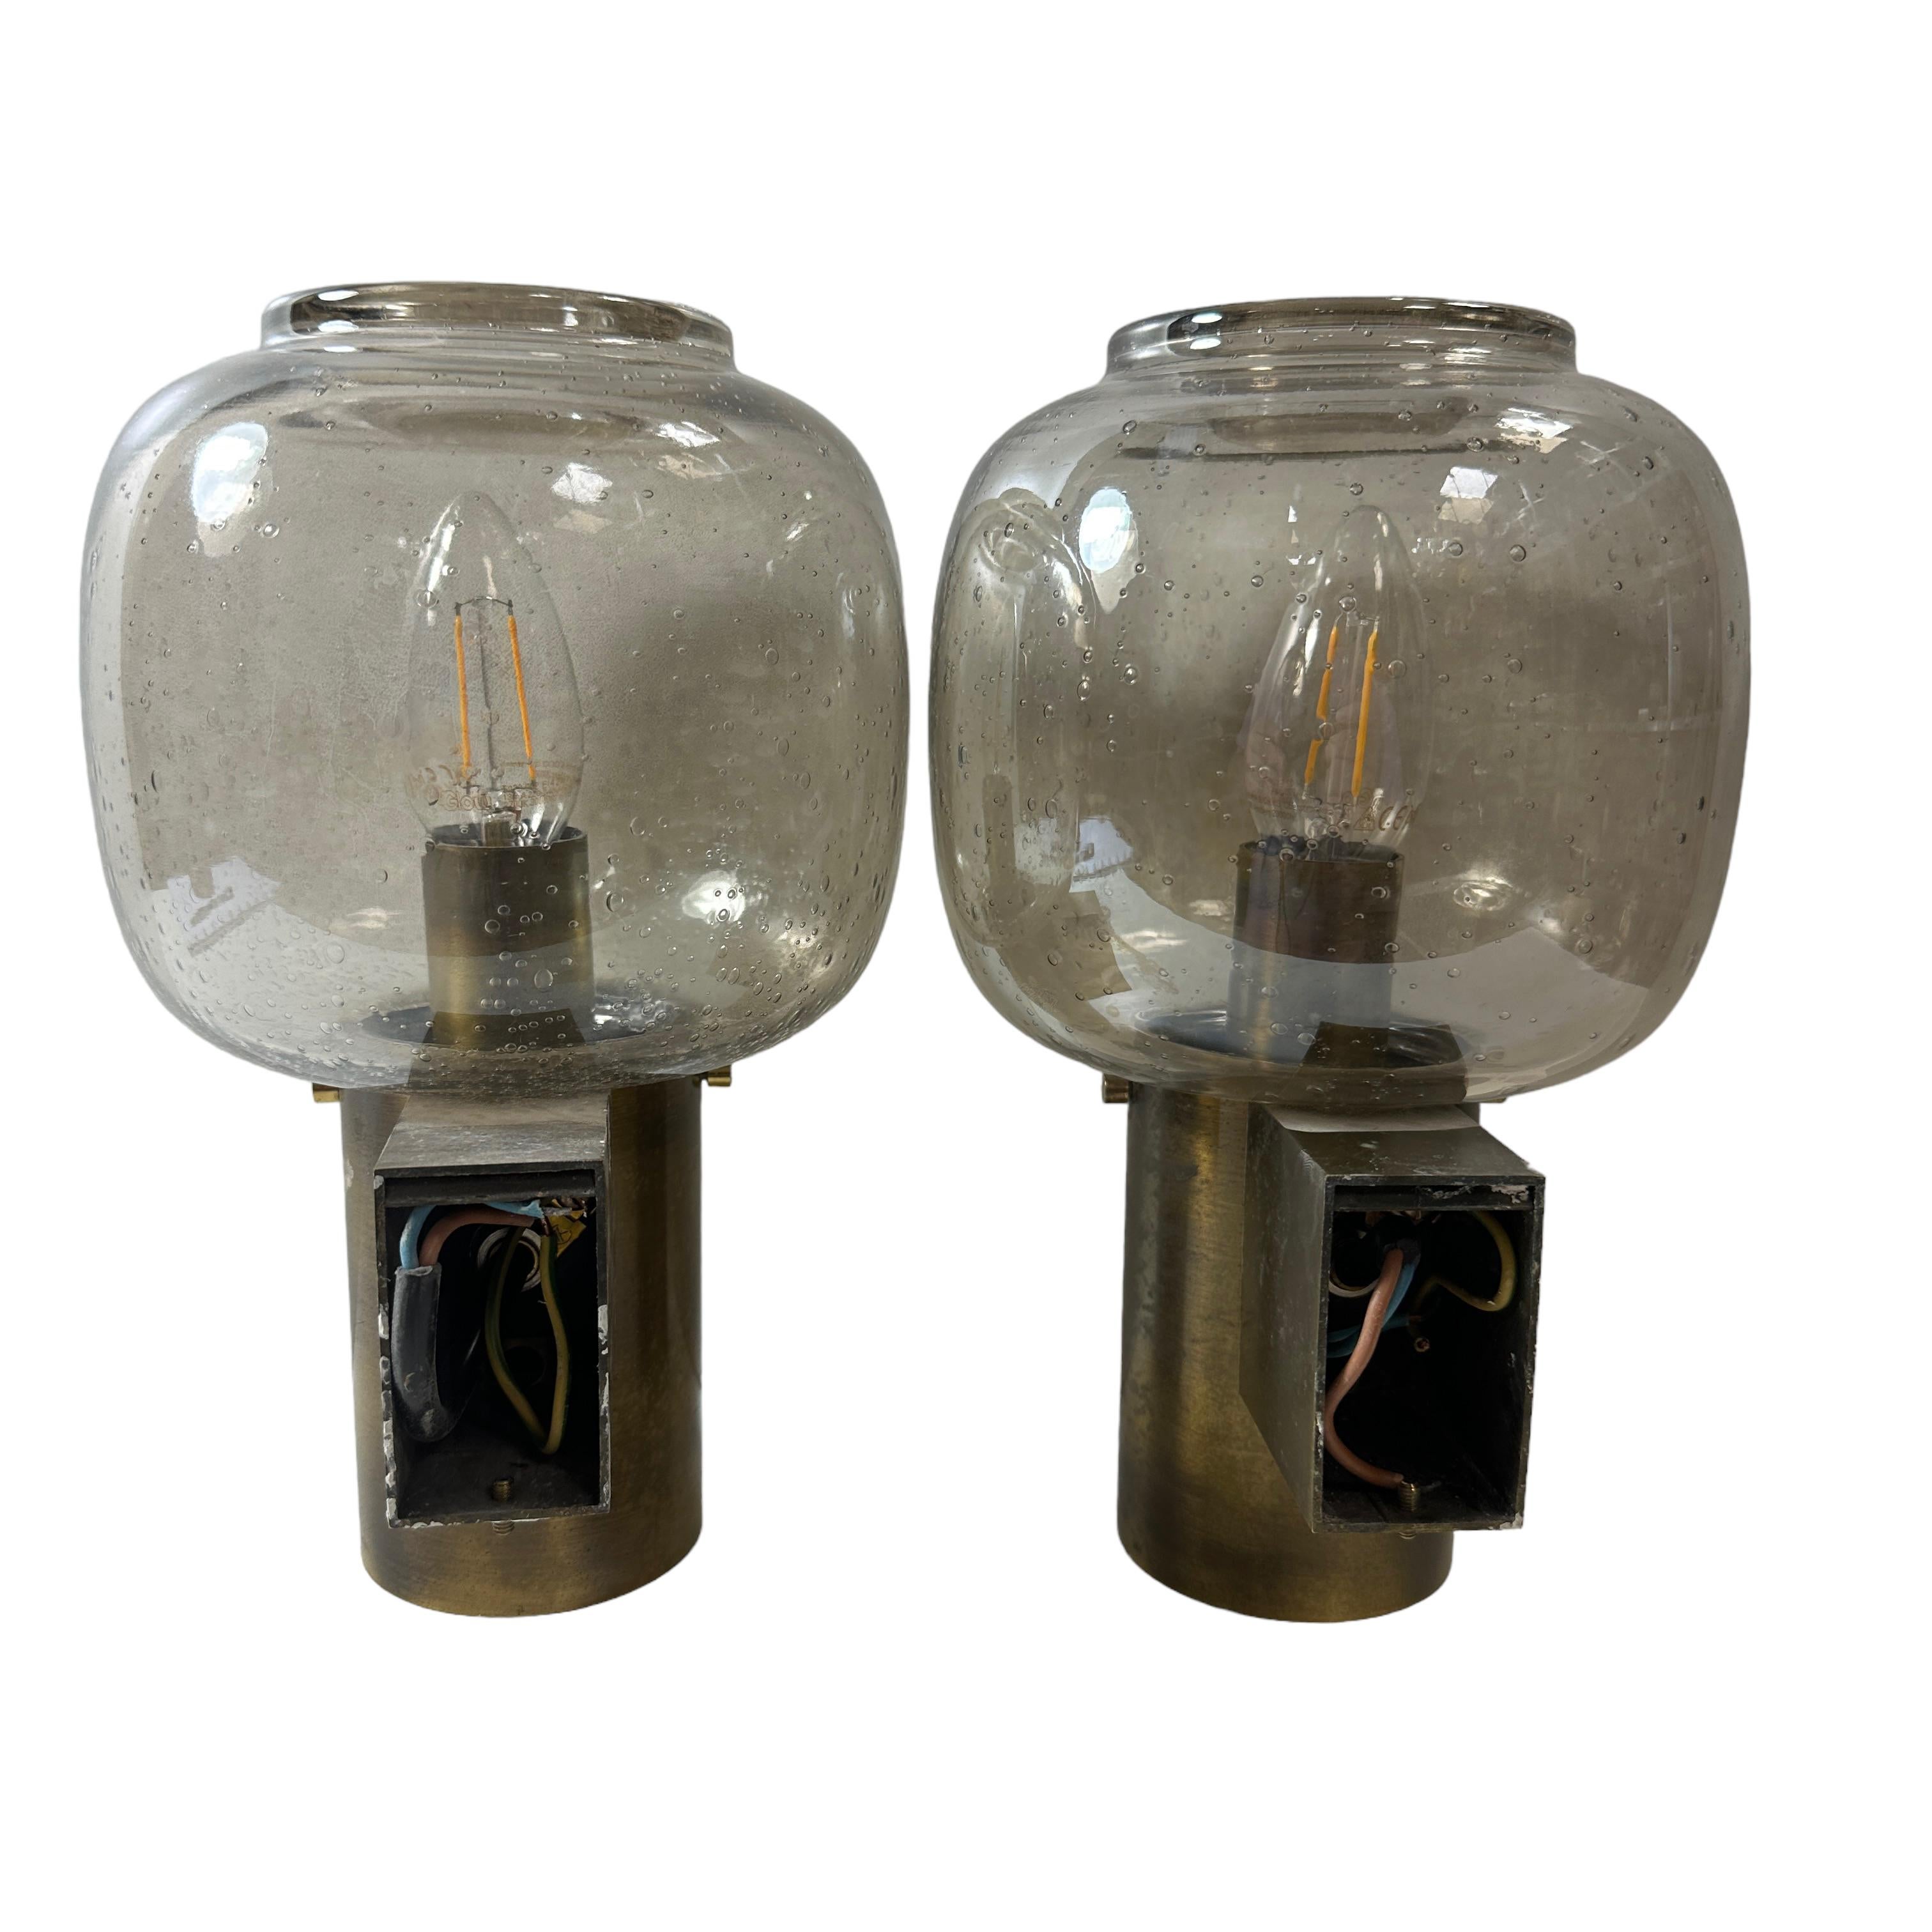 Mid-20th Century Pair of 1960s Wall Sconces in the Style of Hans - Agne Jakobsson, Skandinavia For Sale